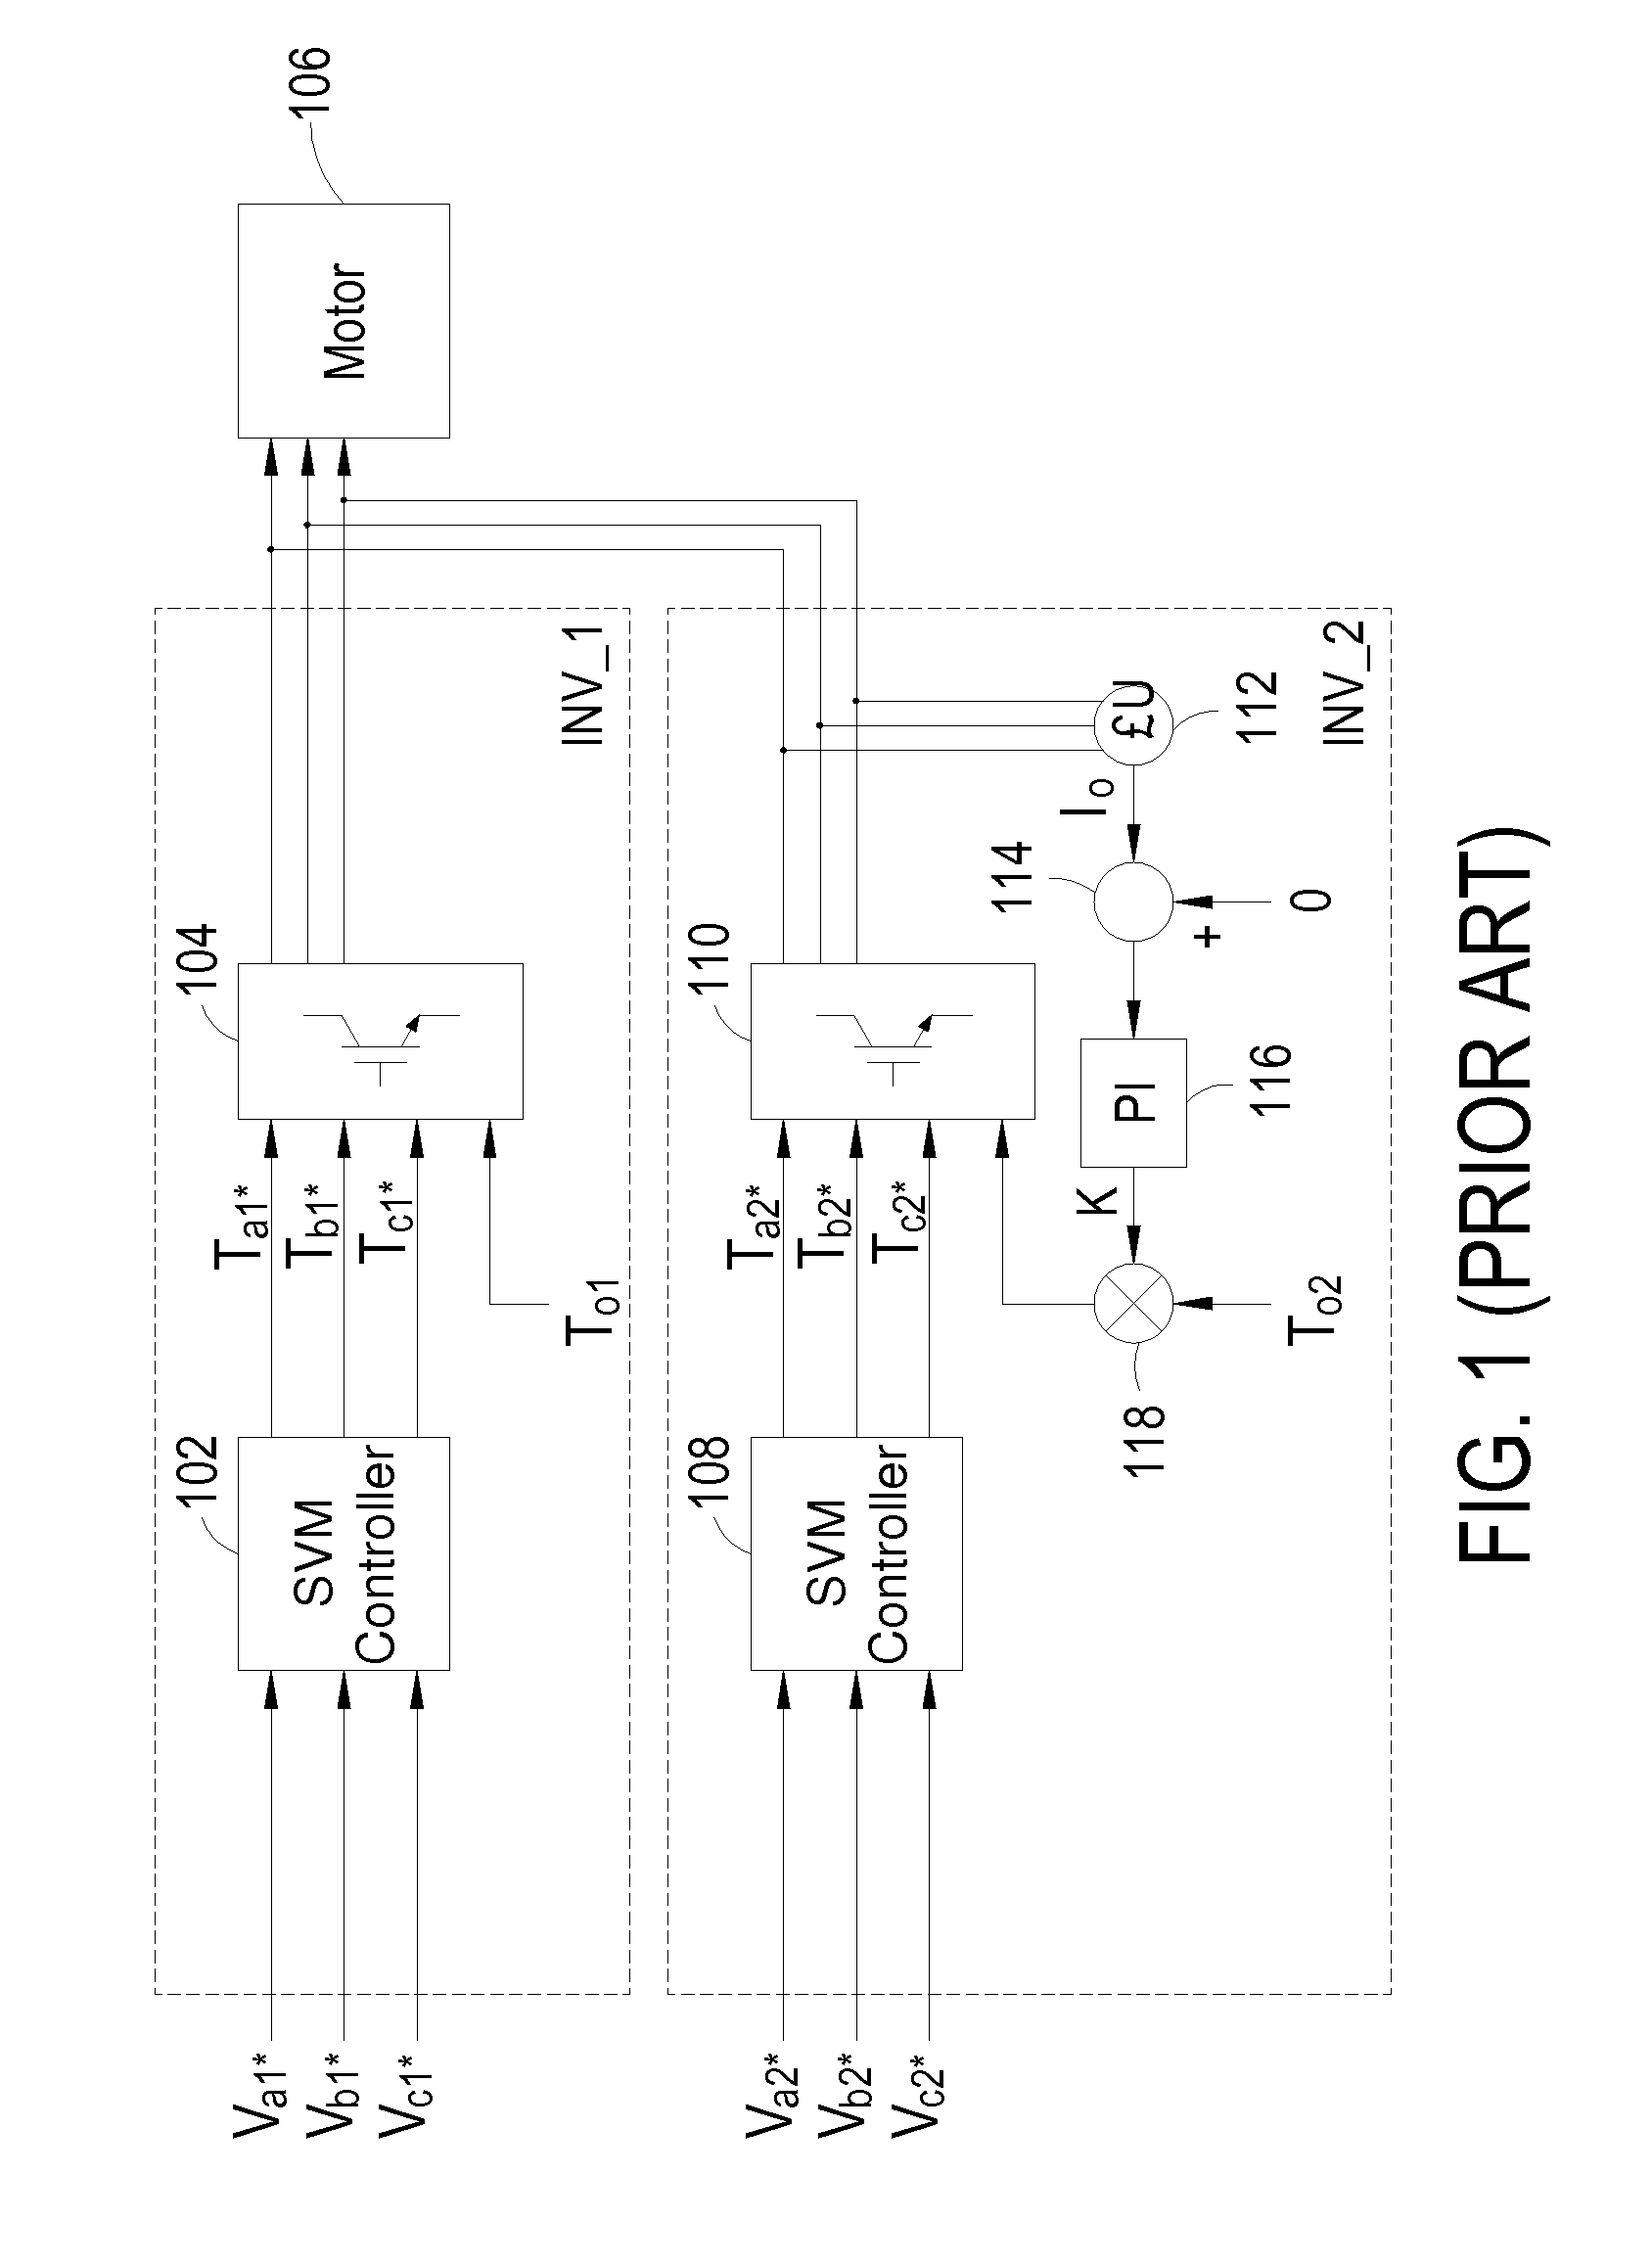 Parallel inverter drive system and the apparatus and method for suppressing circulating current in such system